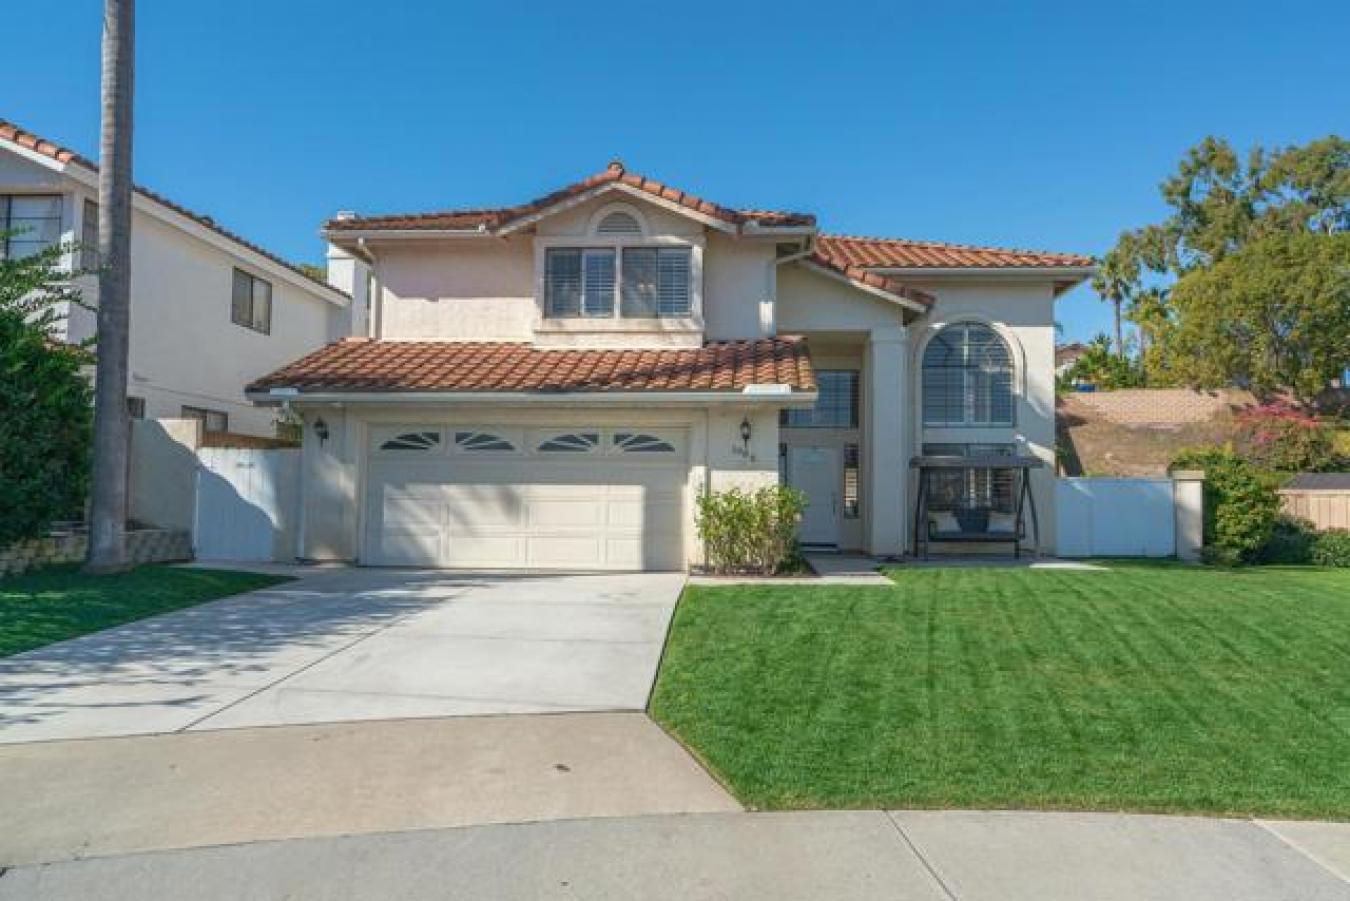 1986 White Birch Drive, Vista, California, 92081, United States, 4 Bedrooms Bedrooms, ,2 BathroomsBathrooms,Residential,For Sale,1986 White Birch Drive,1447763